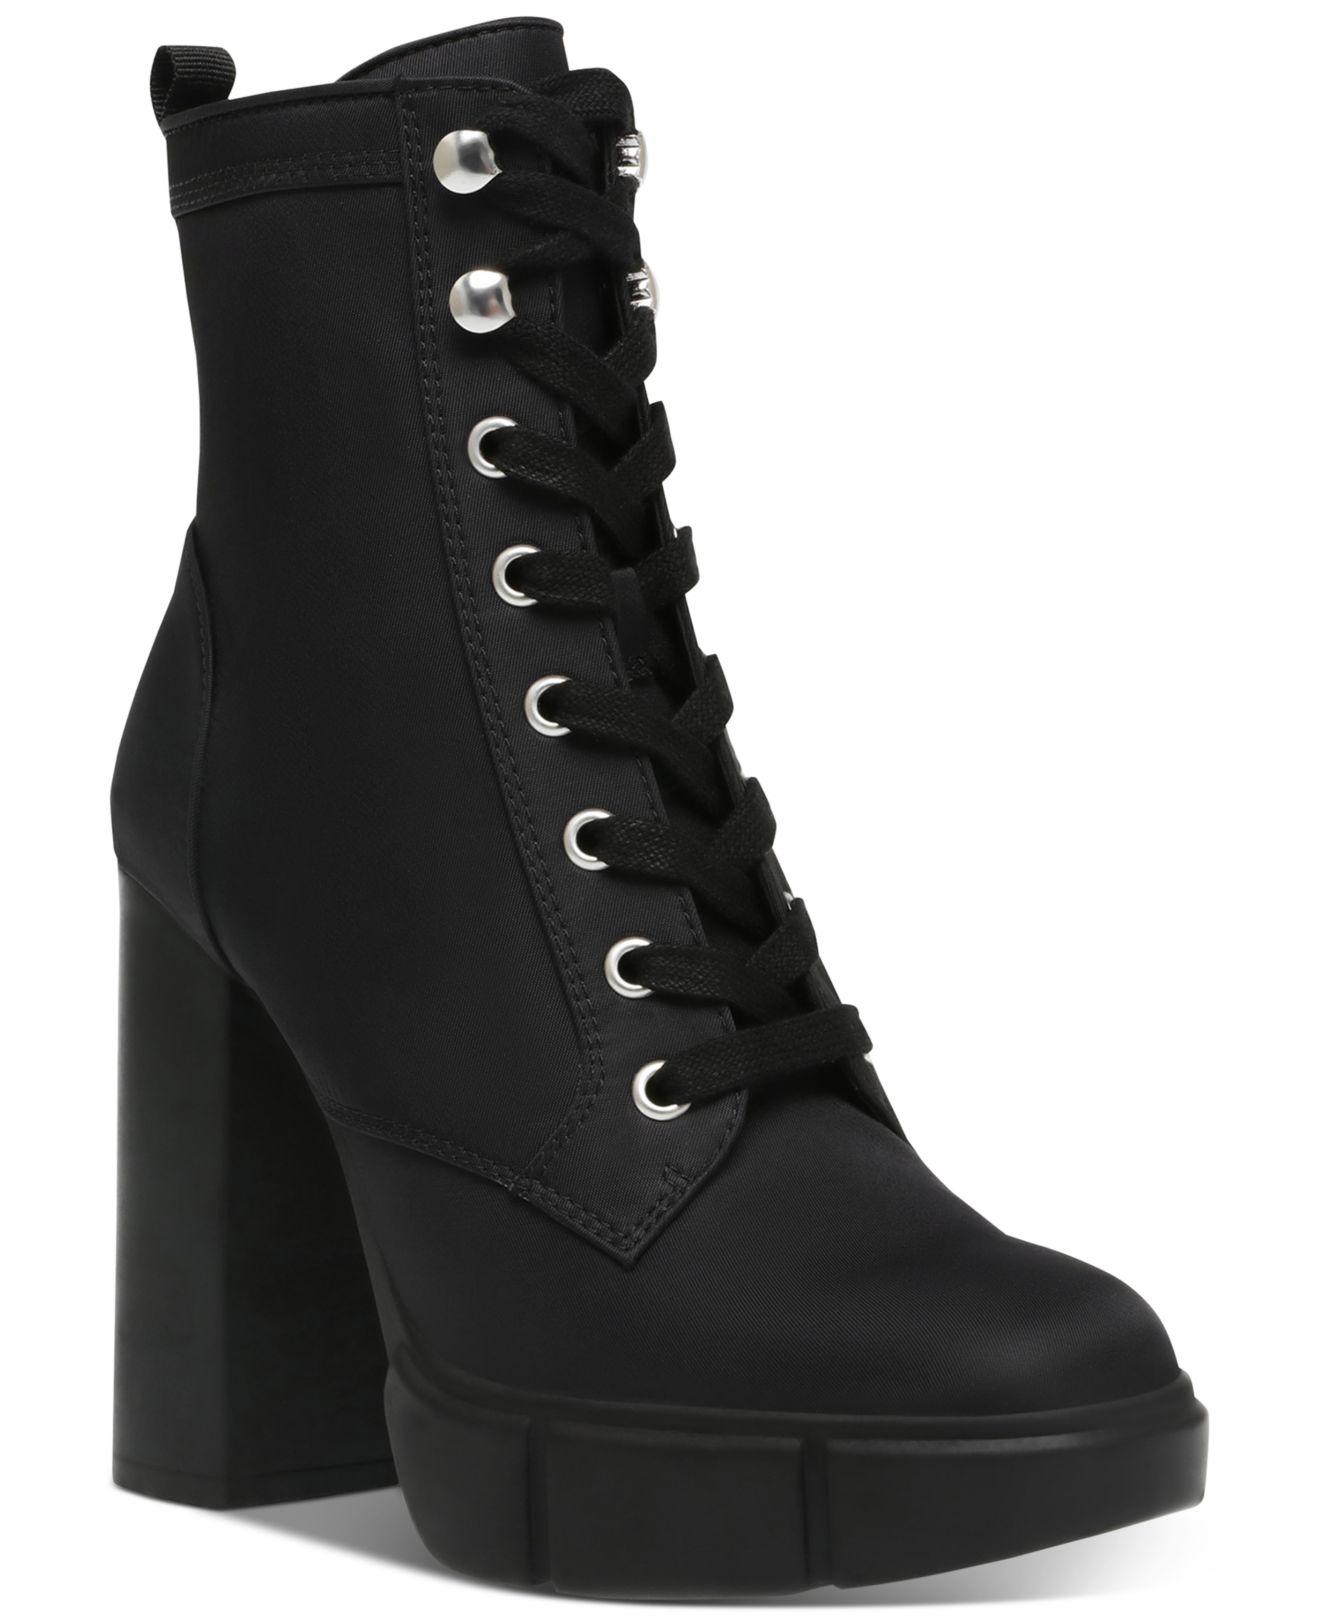 Steve Madden Hani Lace-up High-heeled Booties in Black | Lyst